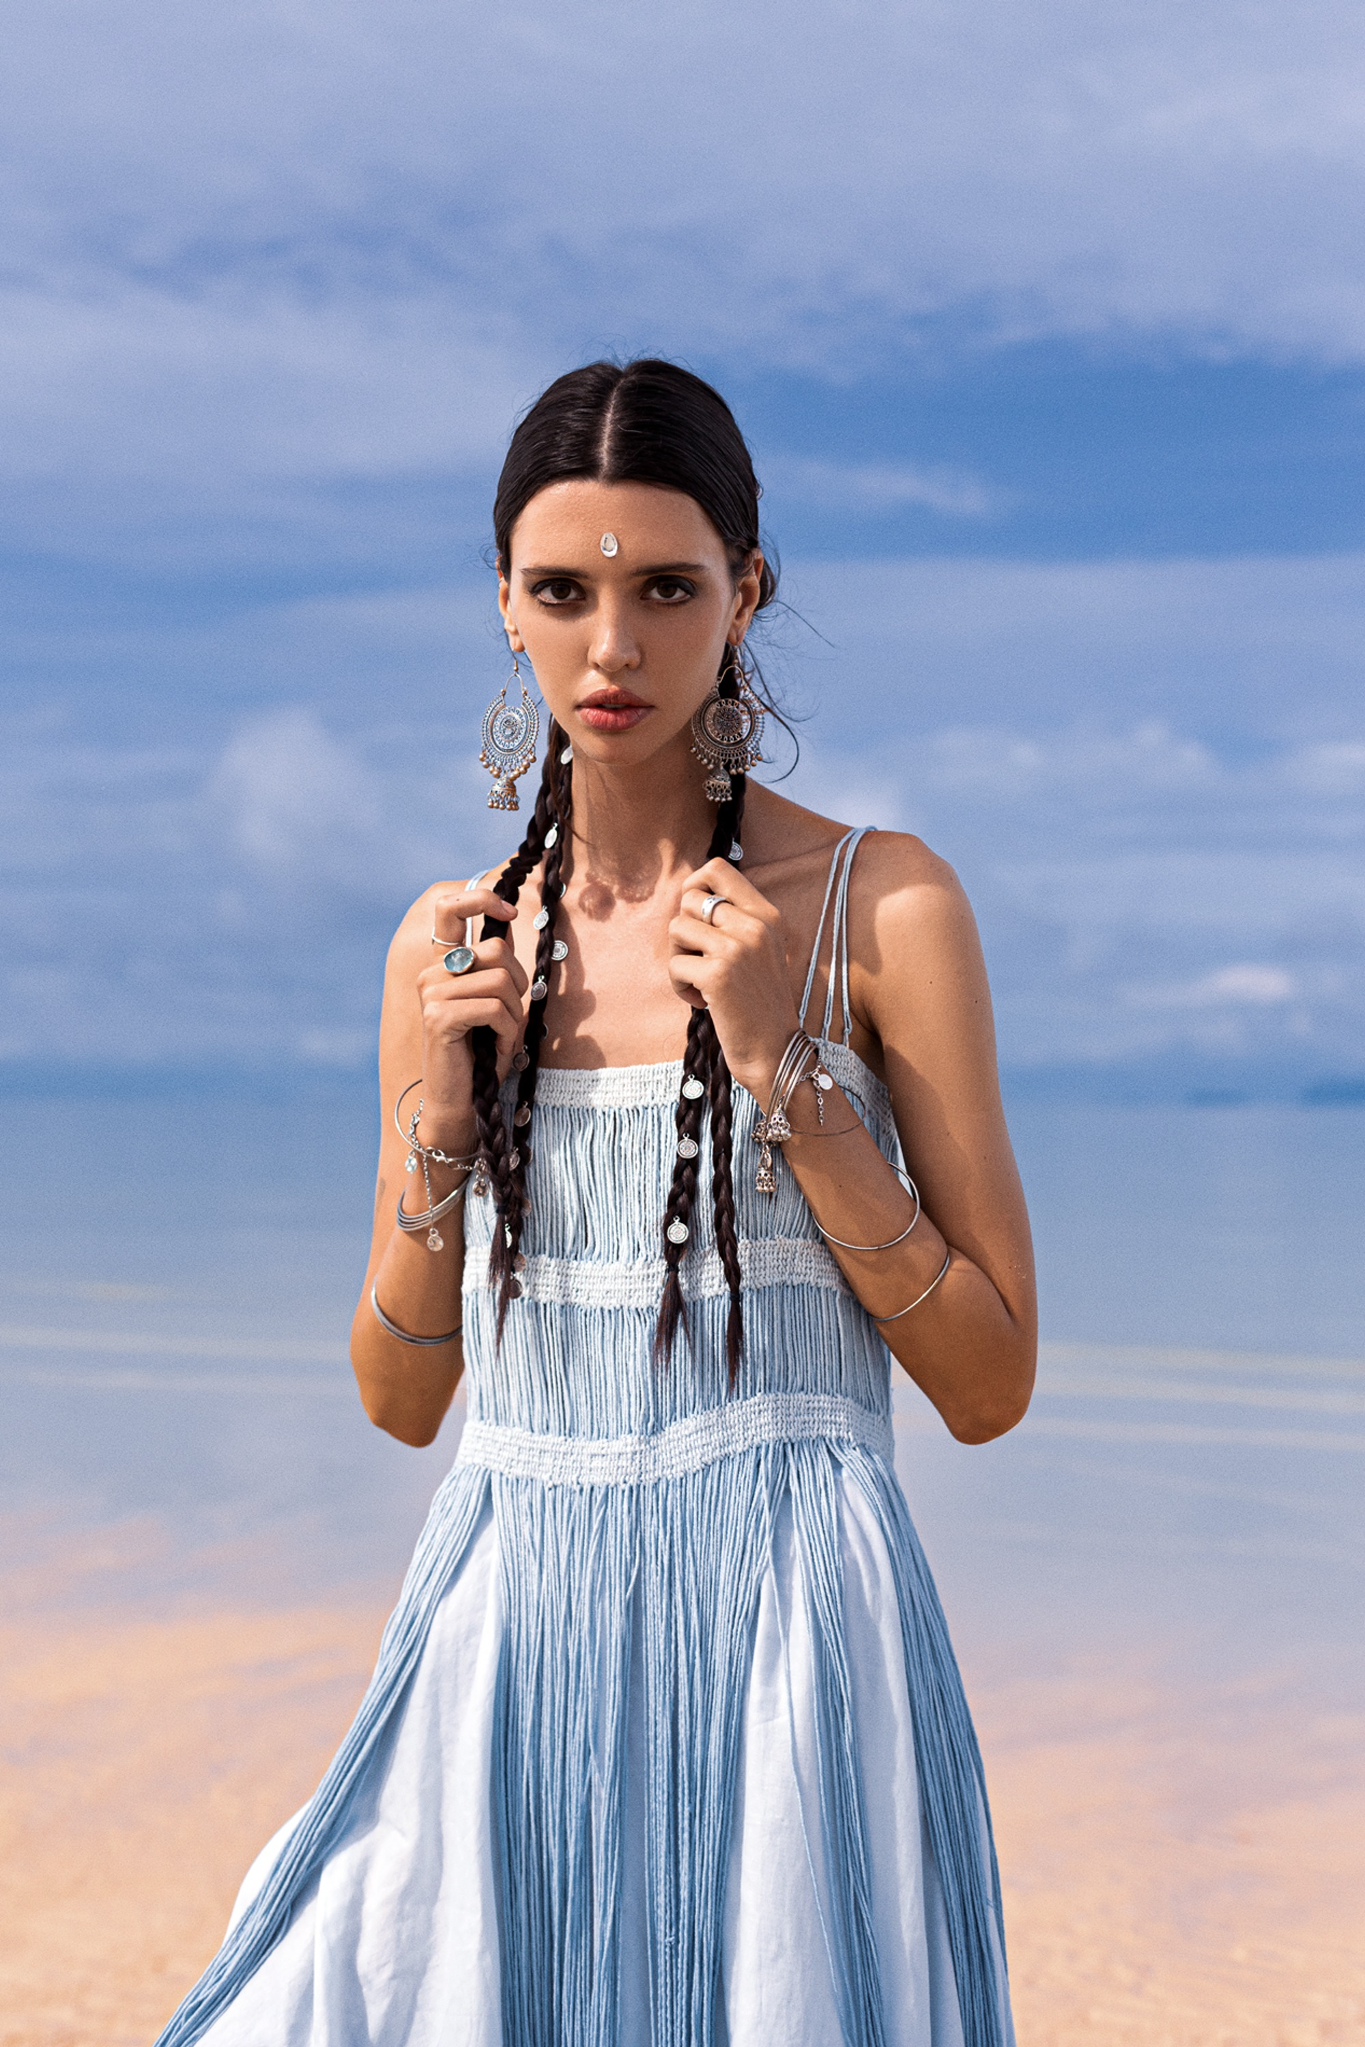 Tribal Chic: Off-White Greek Goddess Dress with Macrame Slip Over. Indulge in the softness of light cotton sustainably dyed, echoing the greatness of mother nature